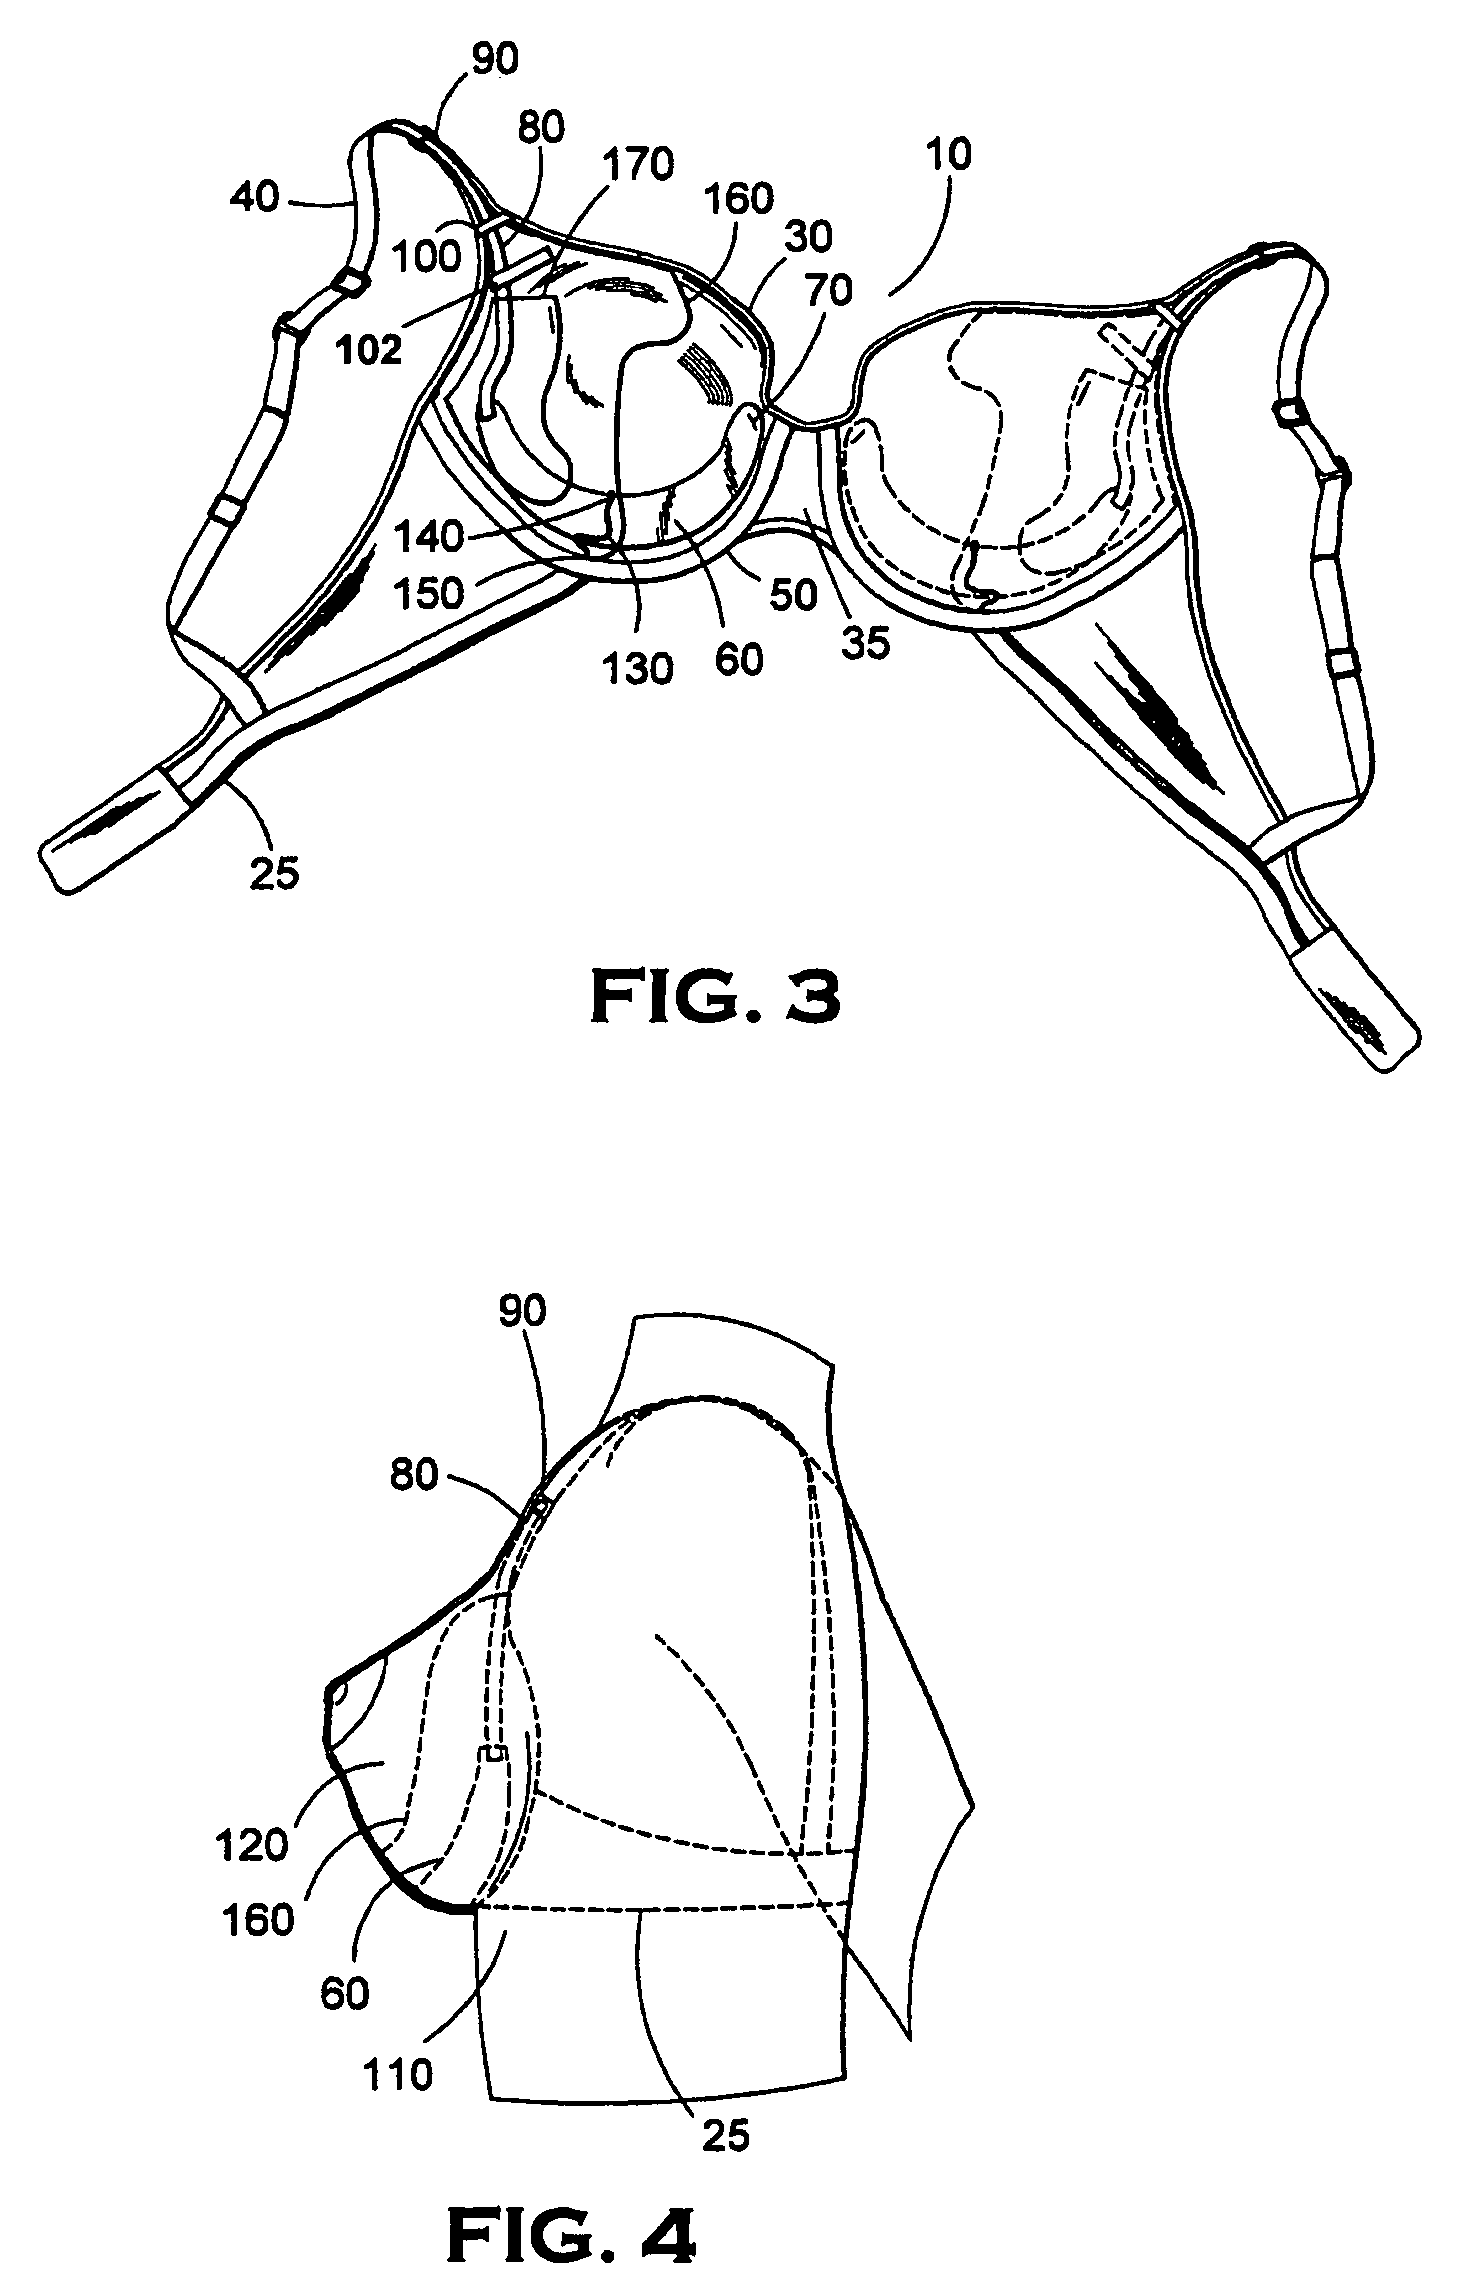 Adjustable breast positioning system for women's garment